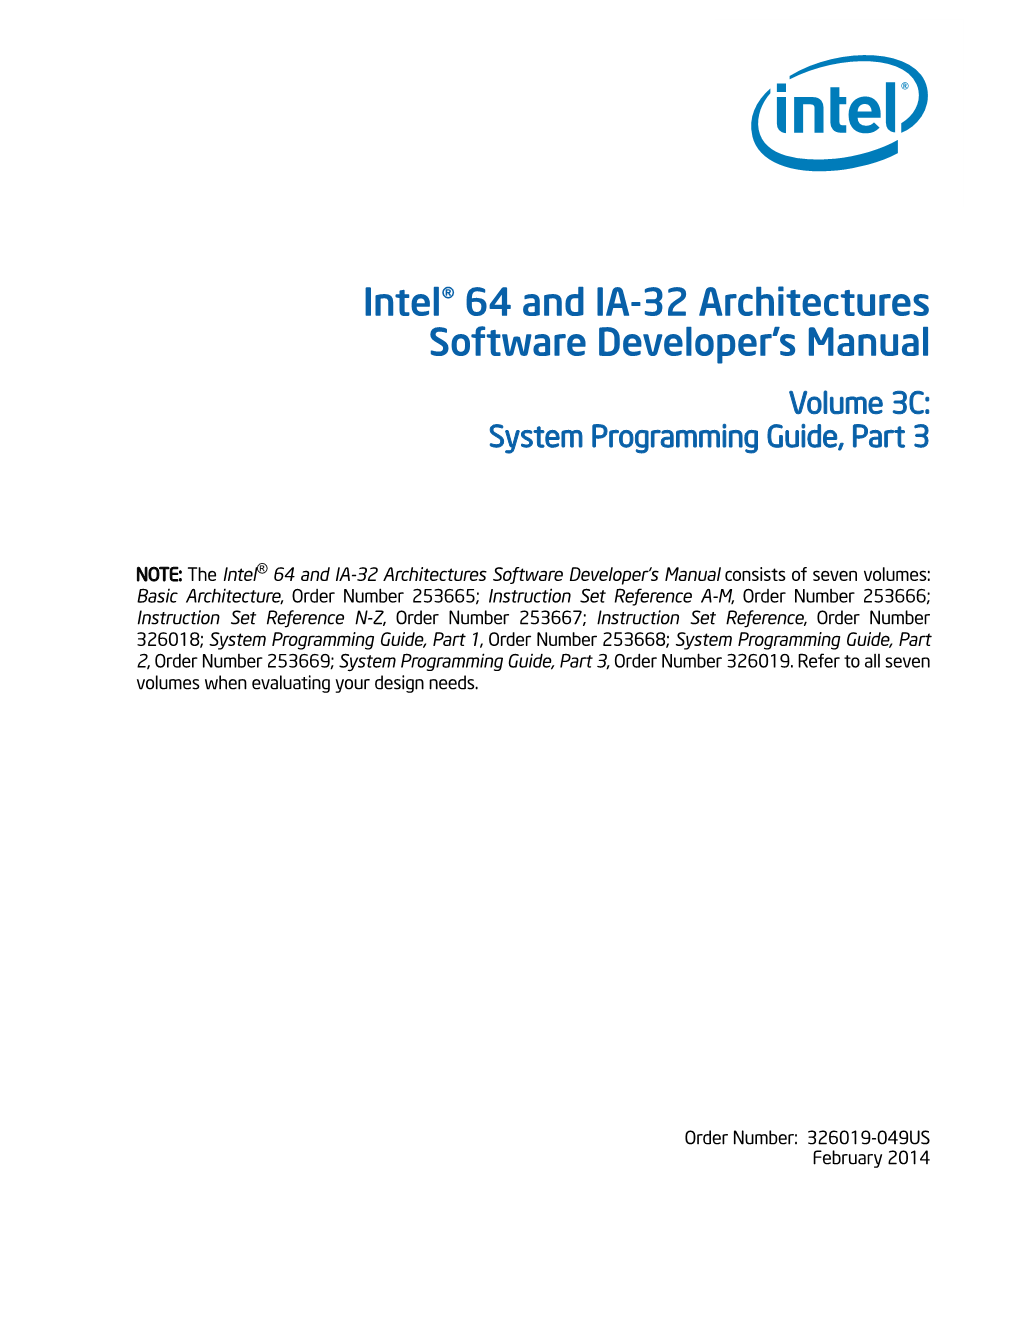 Intel® 64 and IA-32 Architectures Software Developer's Manual, Volume 3C: System Programming Guide, Part 3